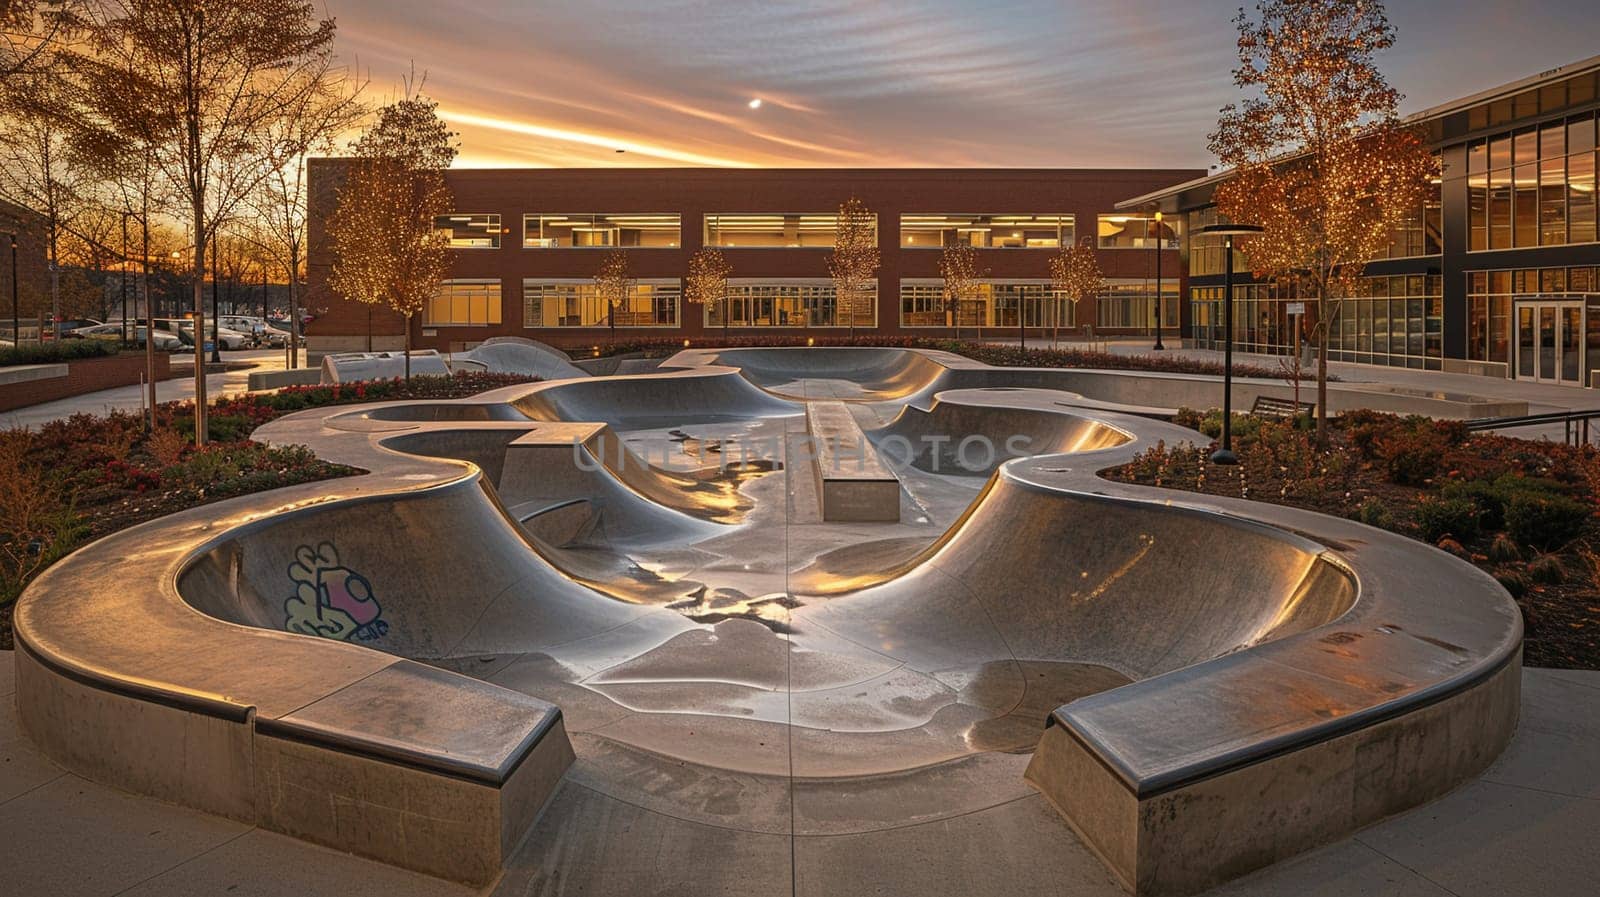 Skateboard Ramps Grind Urban Culture in Business of Youth Sports, Wheels and concrete trace a story of youth and energy in the skateboarding business.